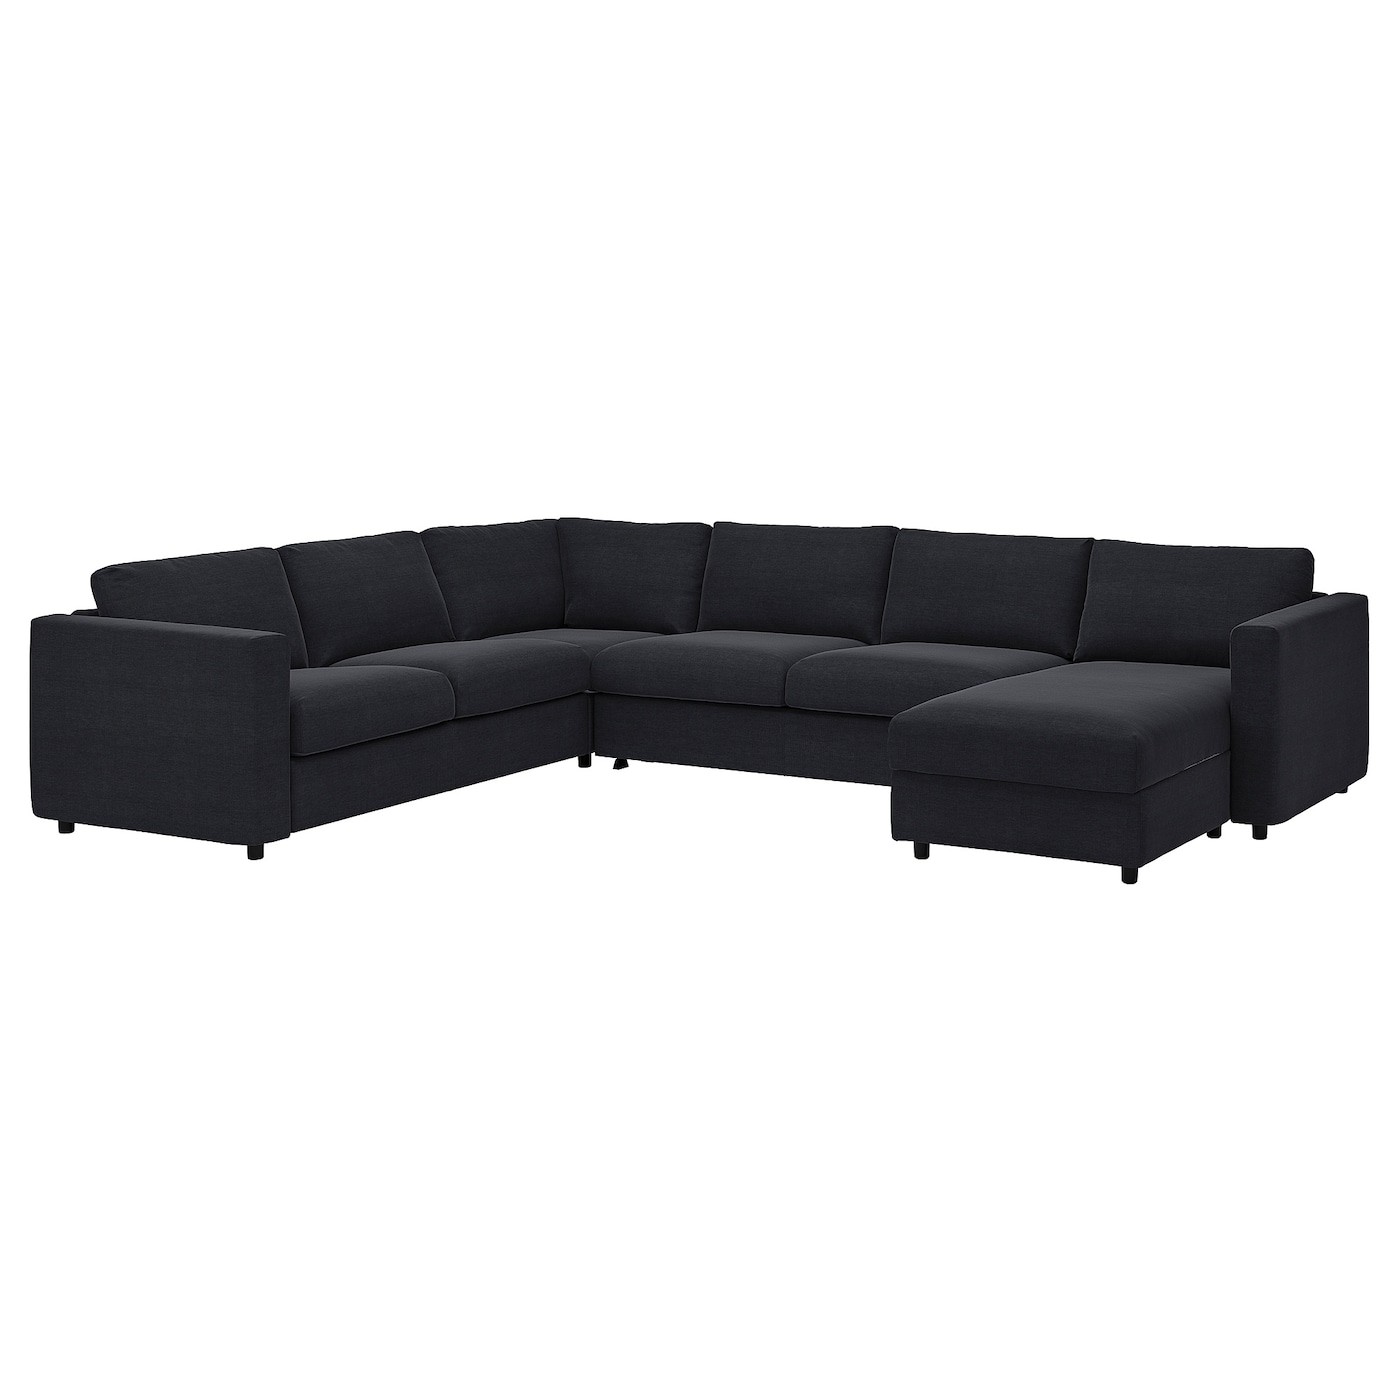 VIMLE Crnr sofa-bed, 5-seat w chaise lng